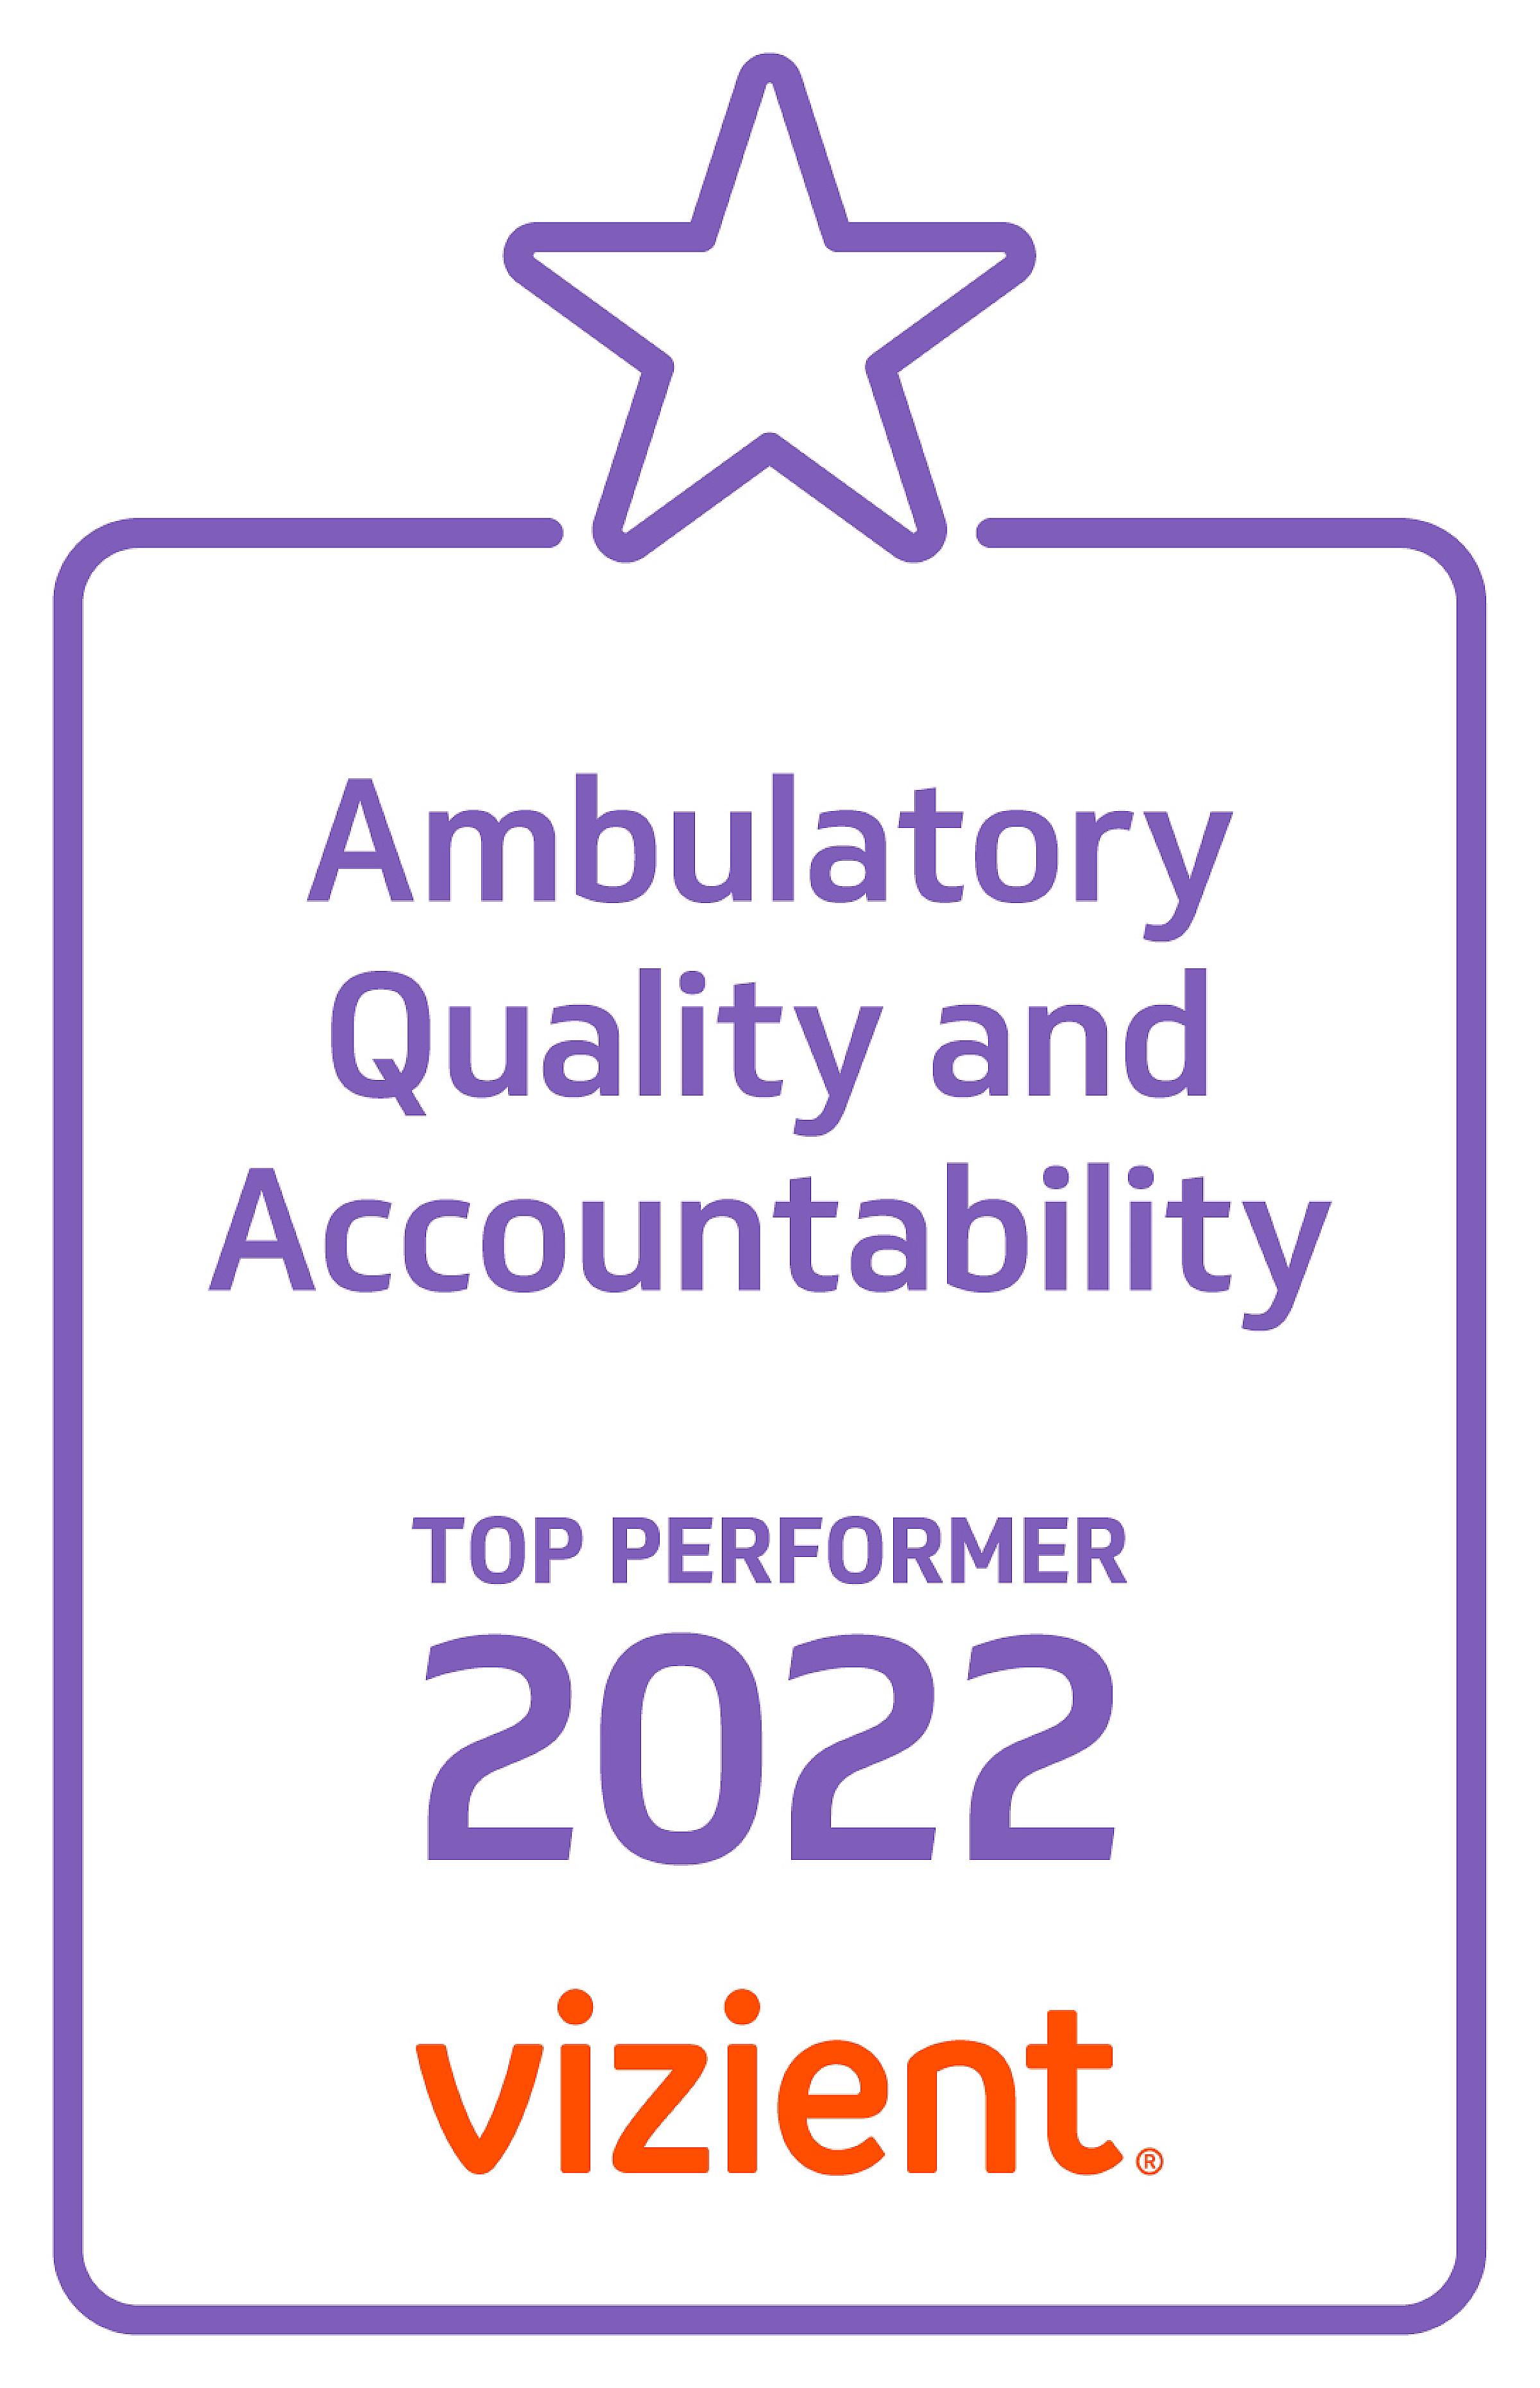 Vizient 2022 Top Performer Ambulatory Care Quality and Accountability Badge